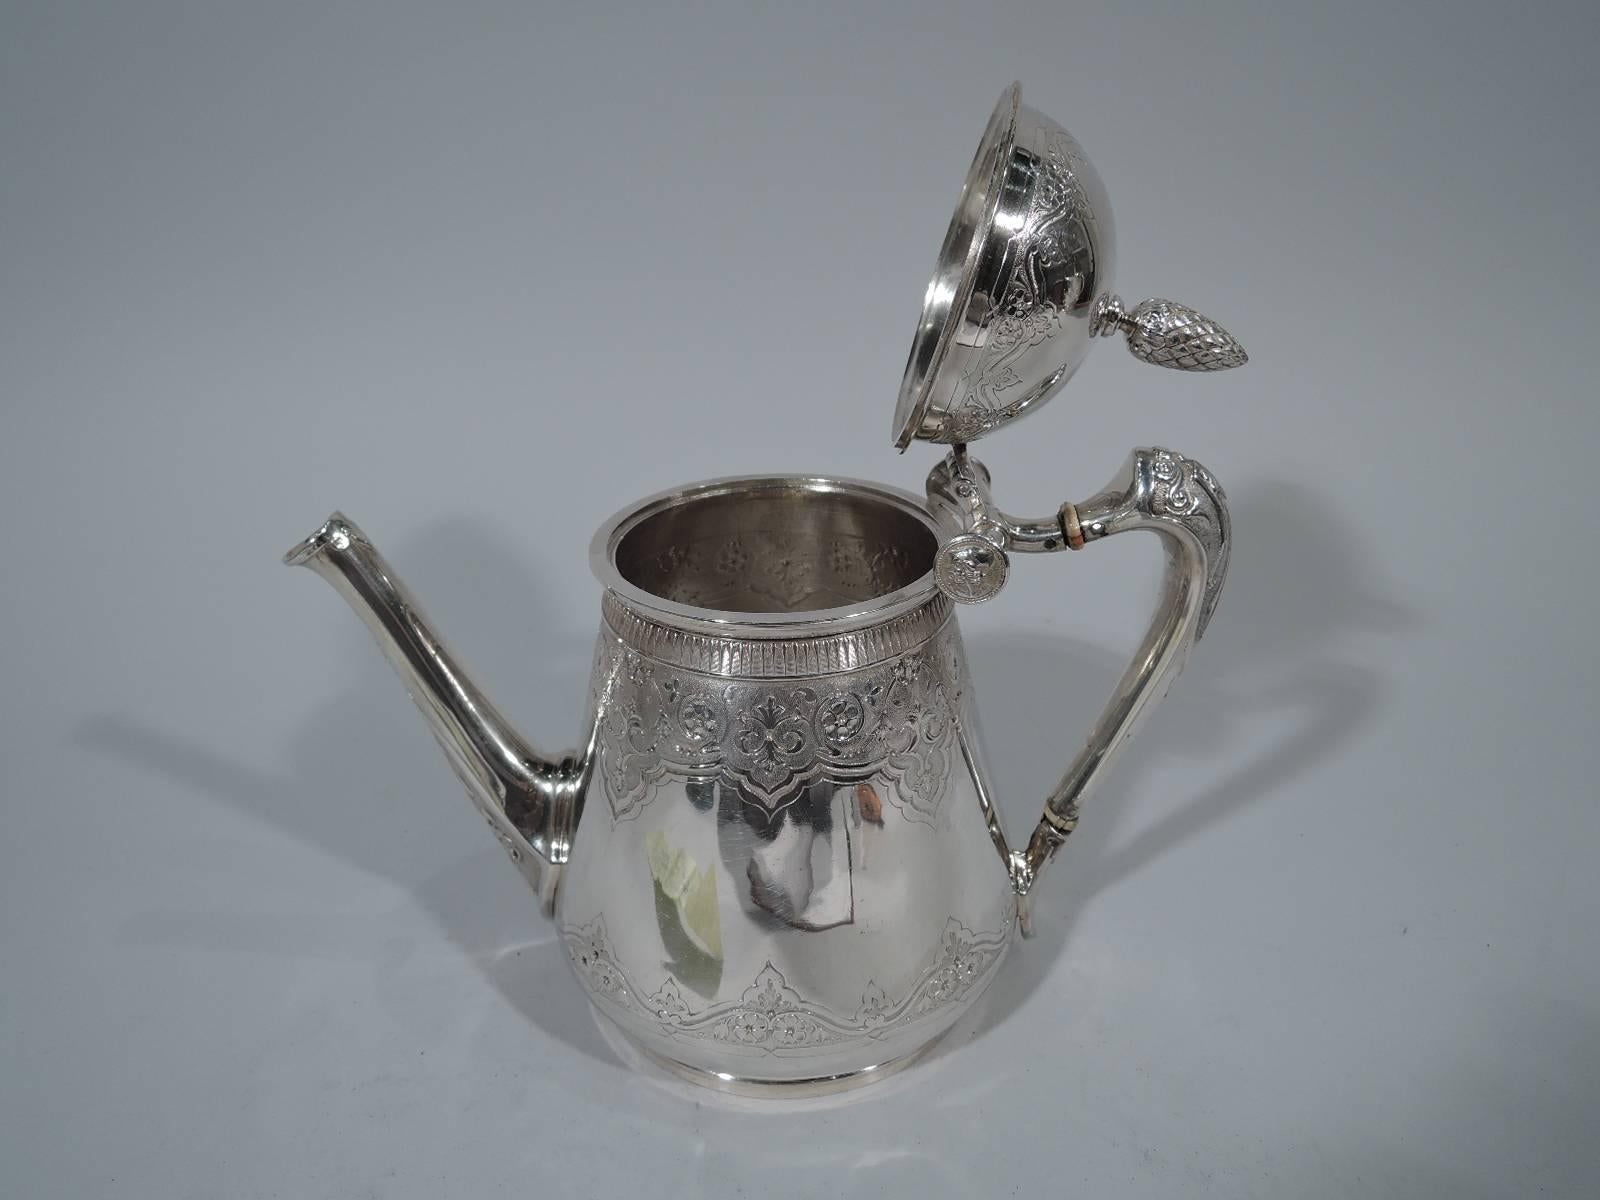 Aesthetic coin silver teapot. Made by Gorham in Providence, circa 1865. Upward tapering sides with curved base and short foot. Diagonal spout, scroll handle, and hinged dome cover with berry finial. Stylized ornament. Engraved frames with flowers on